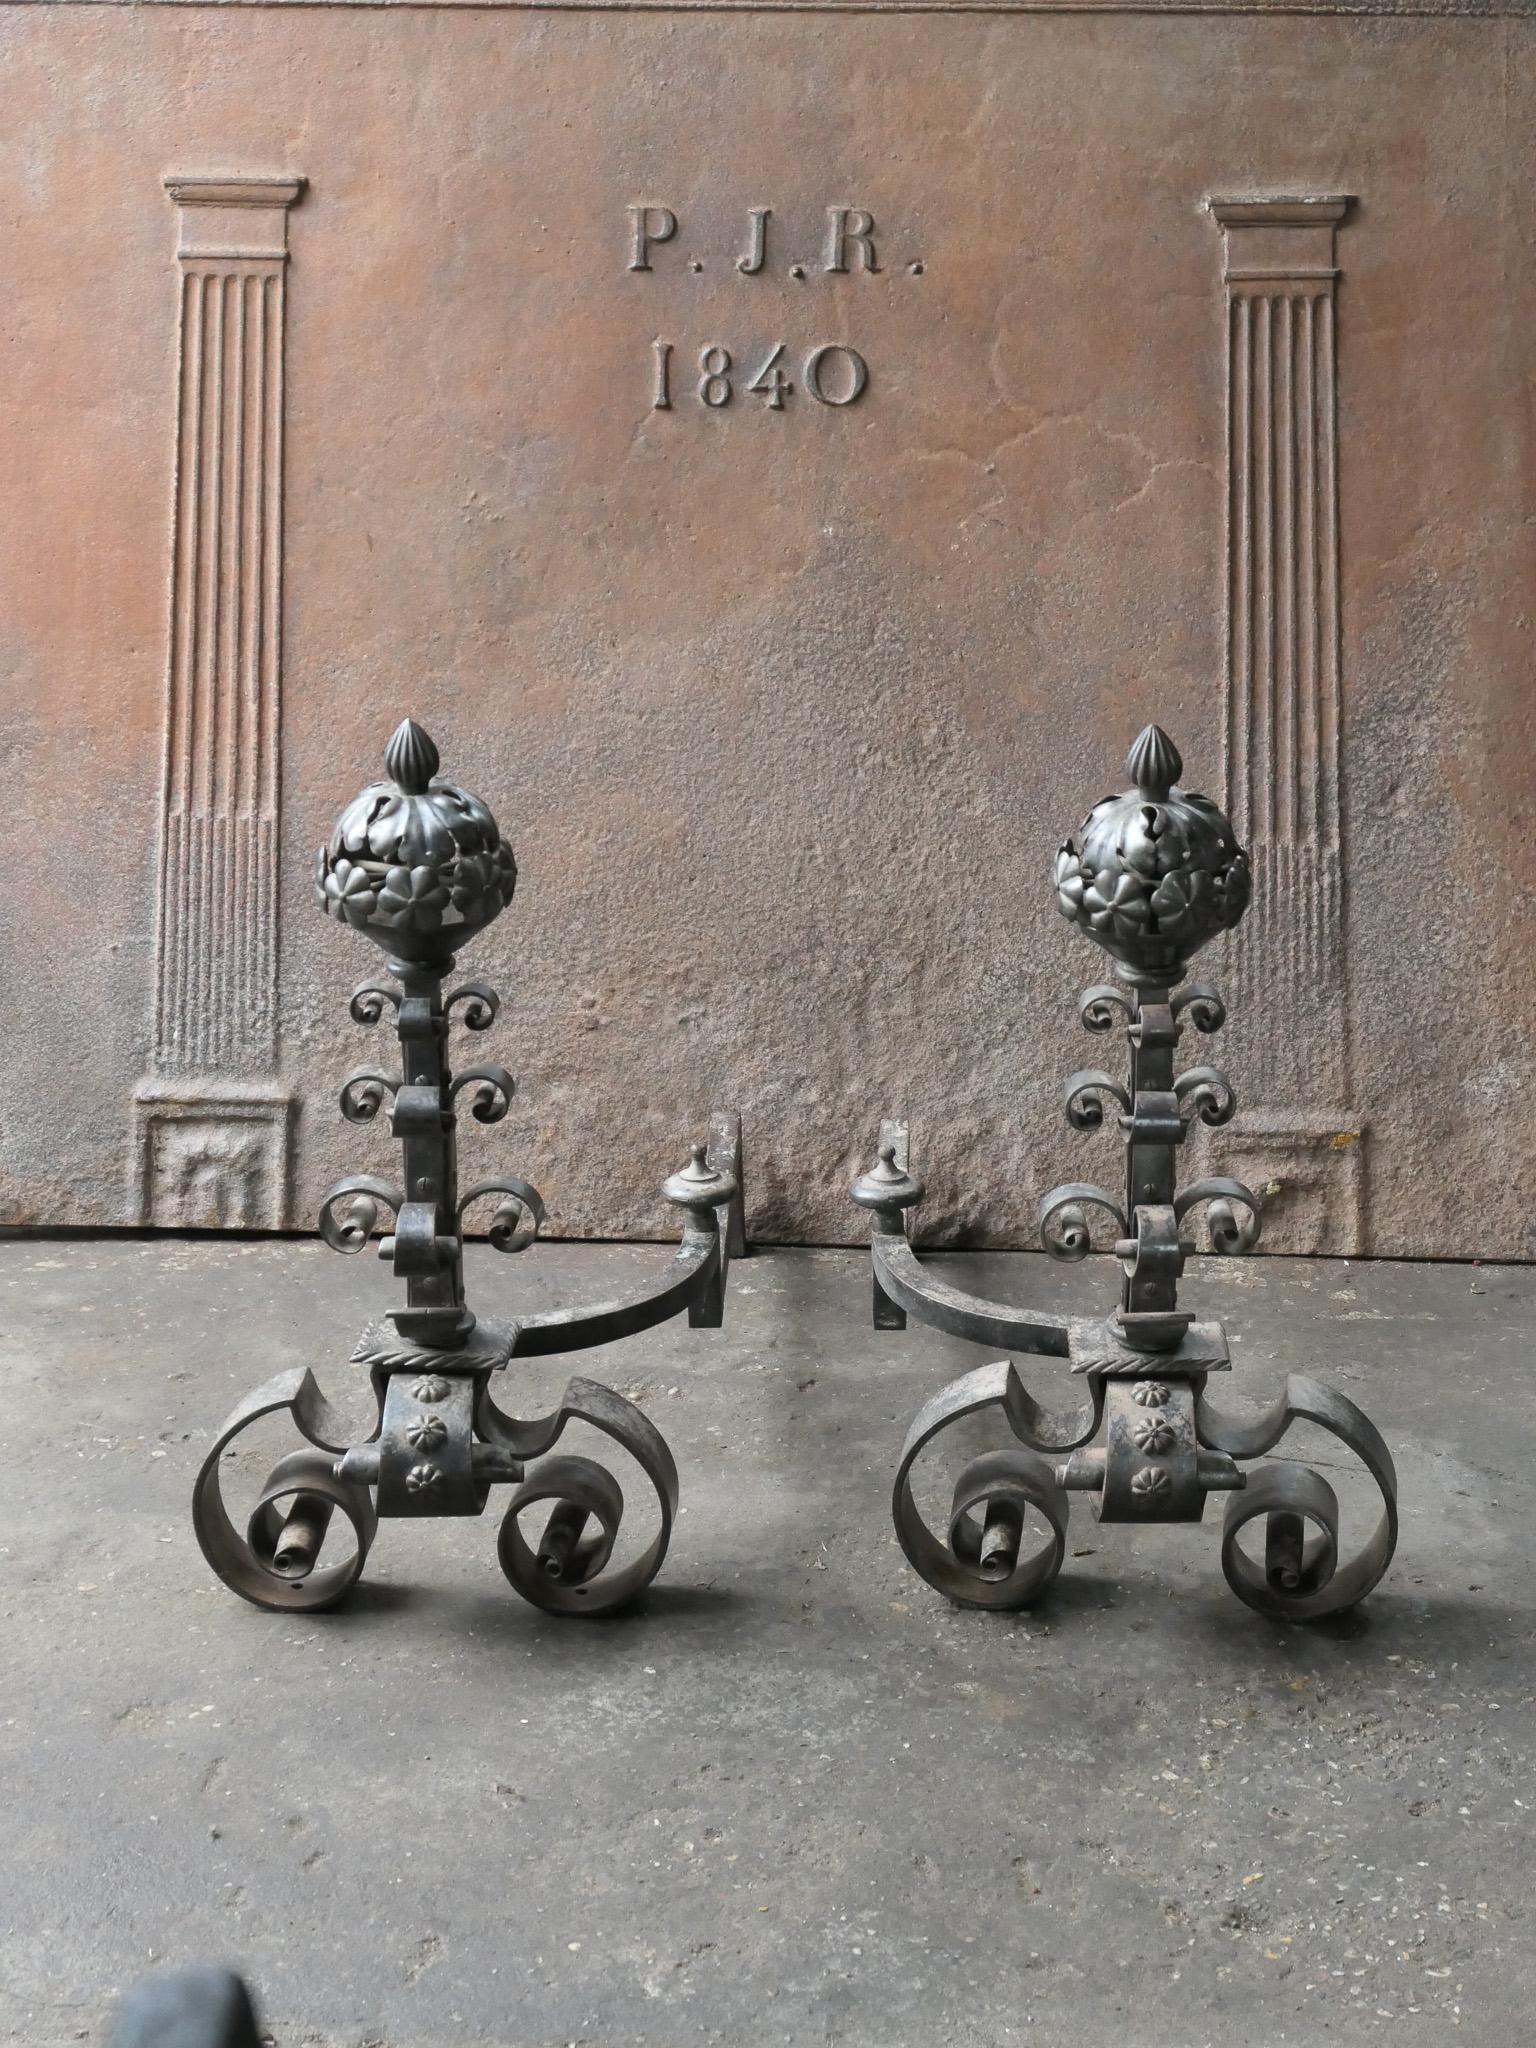 Early 20th century French Art Nouveau andirons made of wrought iron. The andirons are richly decorated. The condition is good.